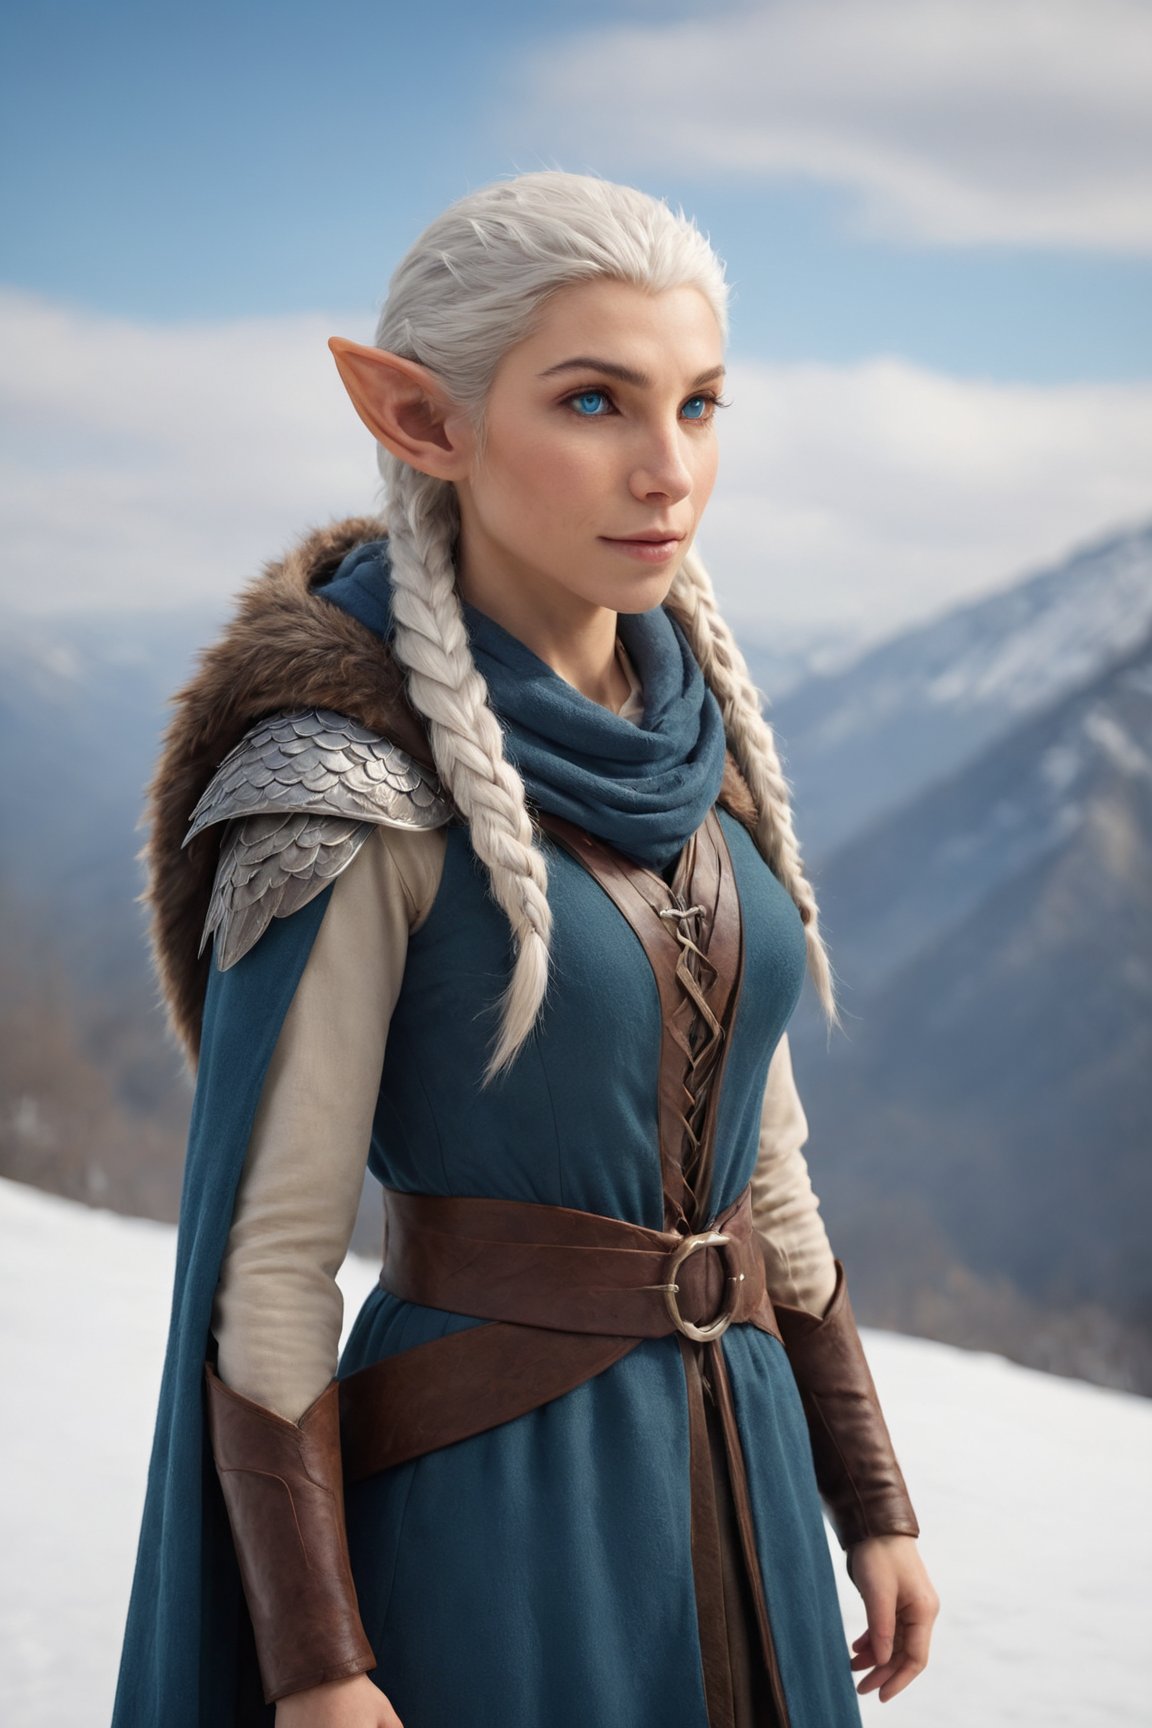 Extreme detailed,ultra Realistic, beautiful young ELF lady,platinum silver shining hair, long elvish braid, side braid, blue-grey eyes,elf ears,(carries a beautiful hawk on arm:1.2), Wearing leather tunic, hooded cloak, animal fur hood, intricate clothing, animal fur clothing, dark clothing, waistband, scarf, soft smile, bending posture, looking into the distance, snowy mountain scenery, overlooking valley, river, white clouds, seen from behind,ol1v1adunne
